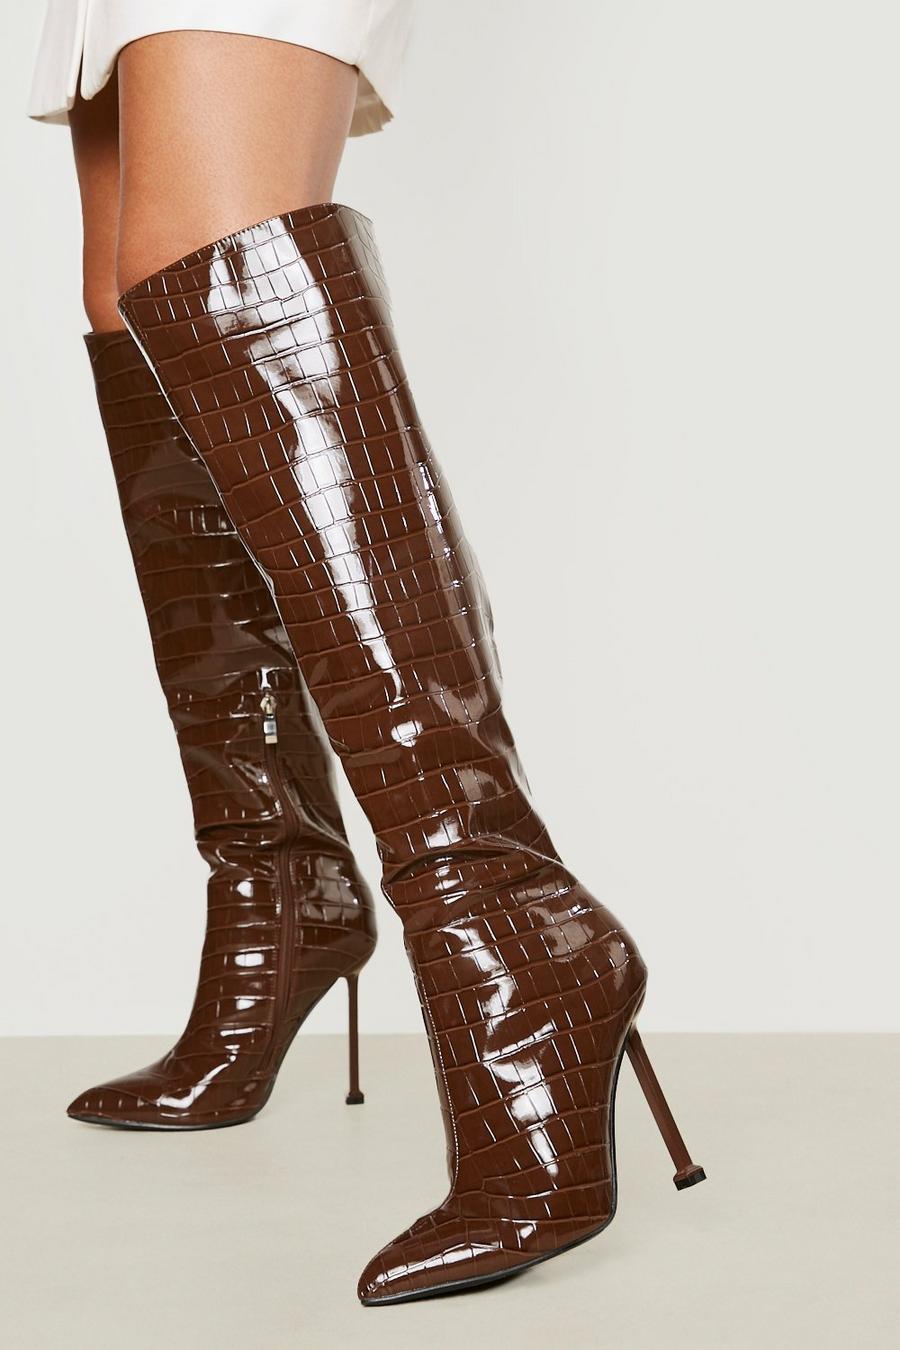 Chocolate brown Over The Knee Croc Heeled Boots